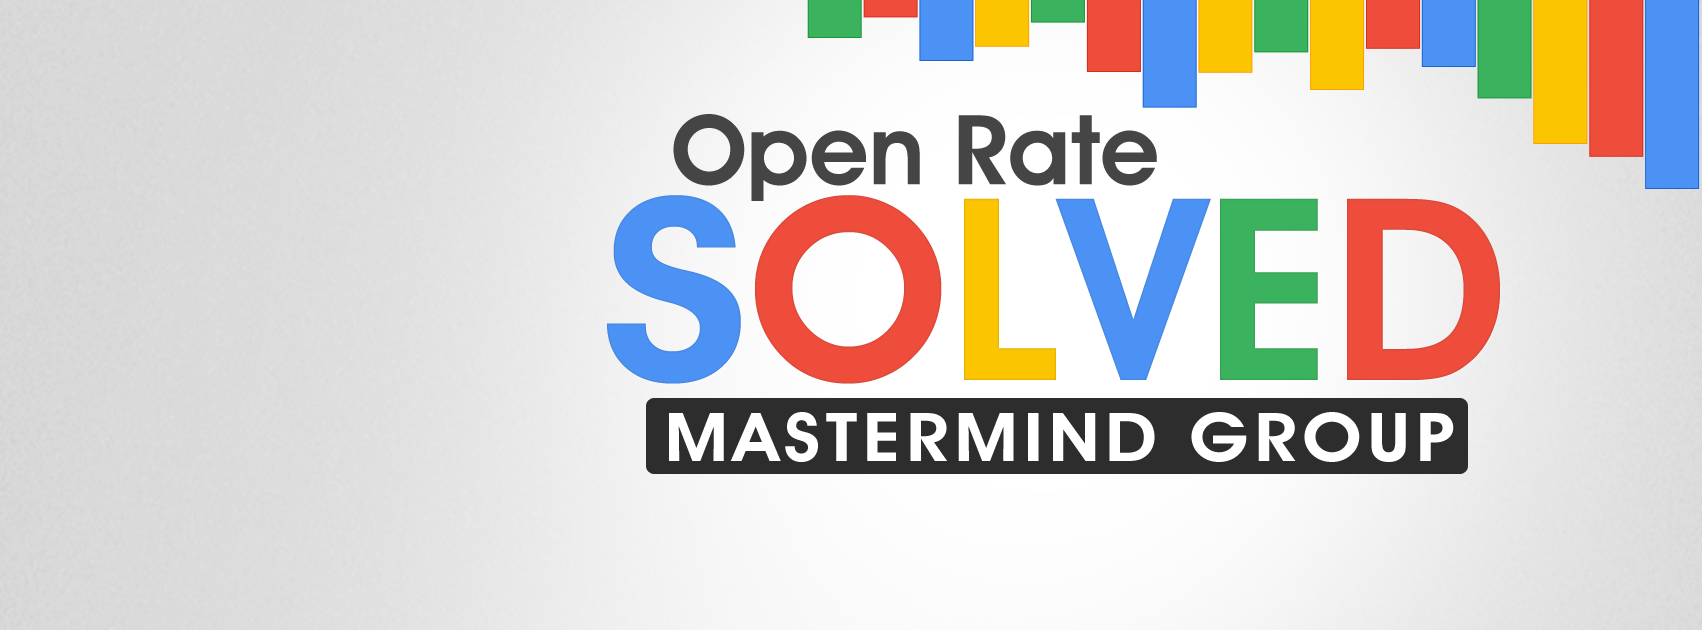 open-rate-solved-mastermind-group